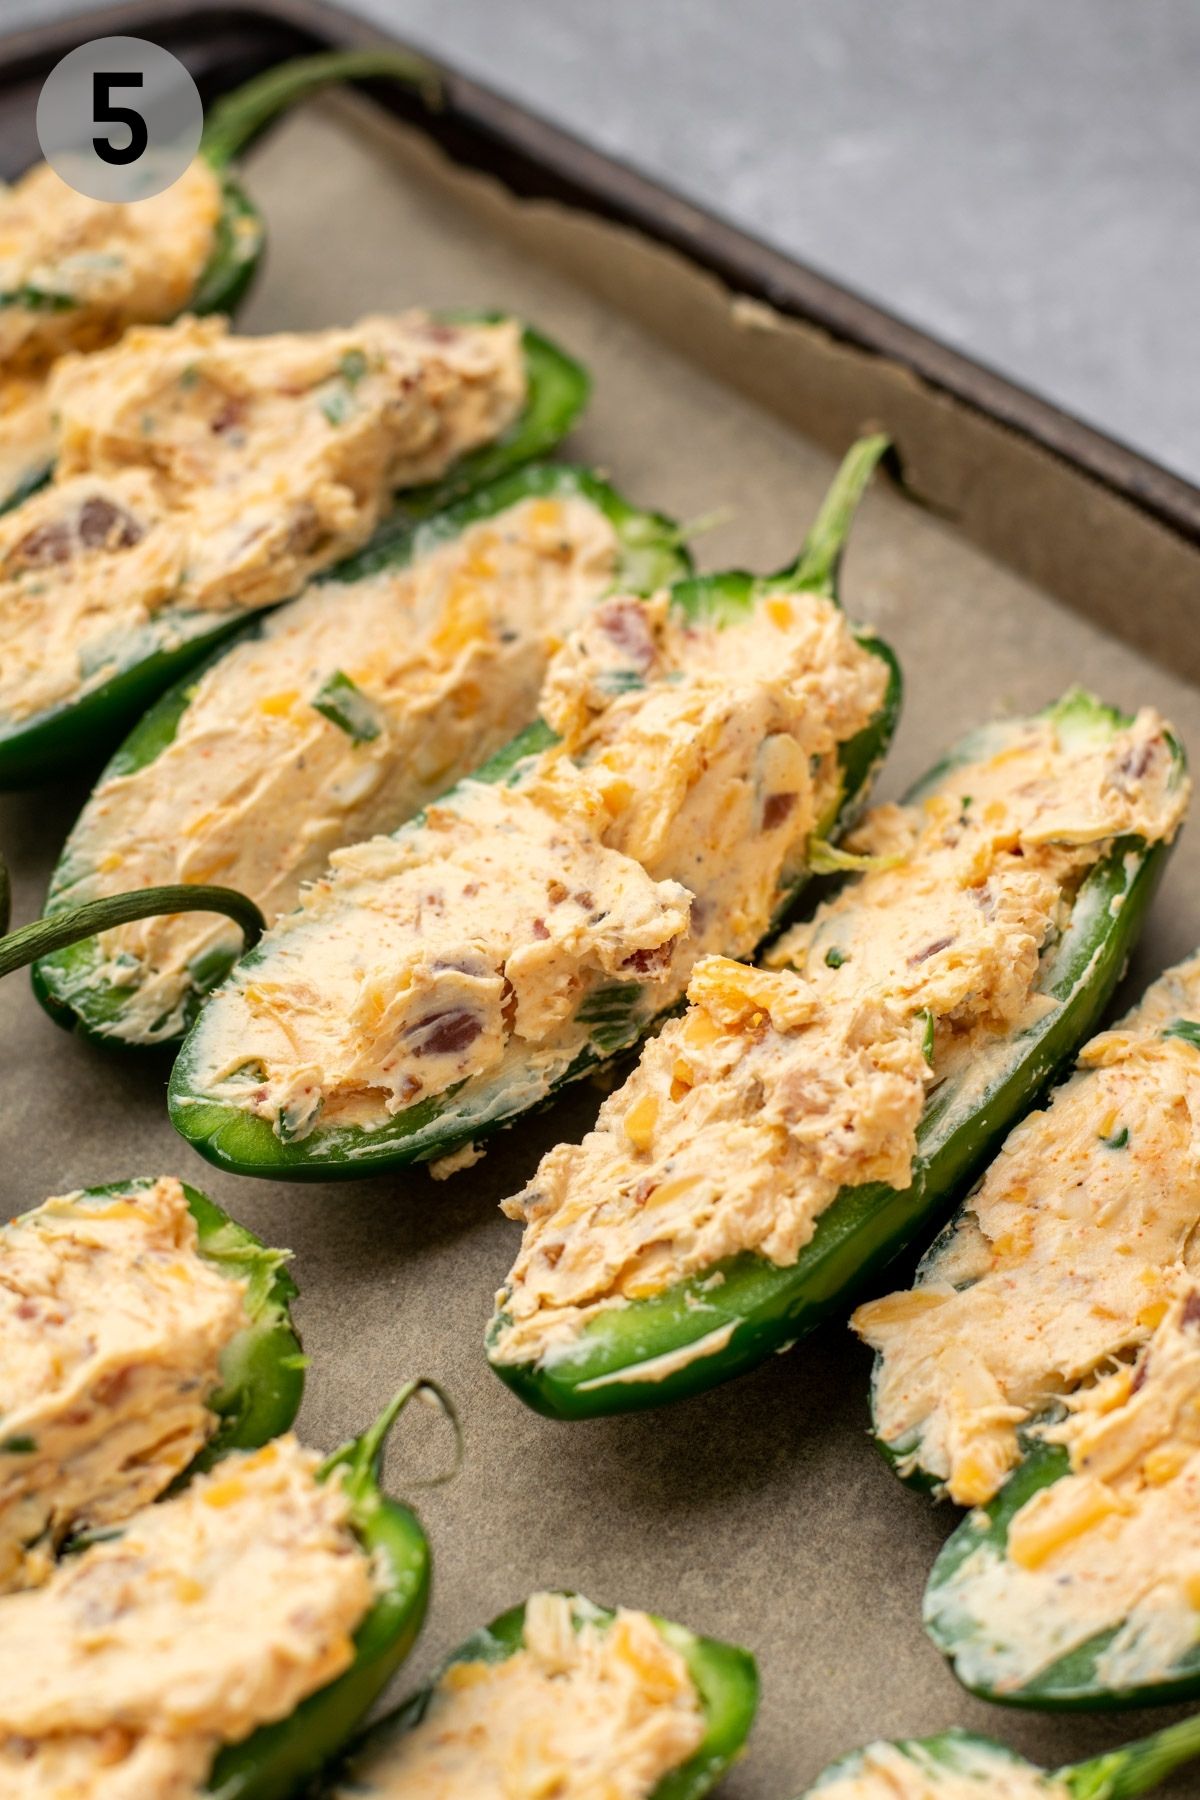 jalapeño halves filled with cream cheese mixture on a baking sheet